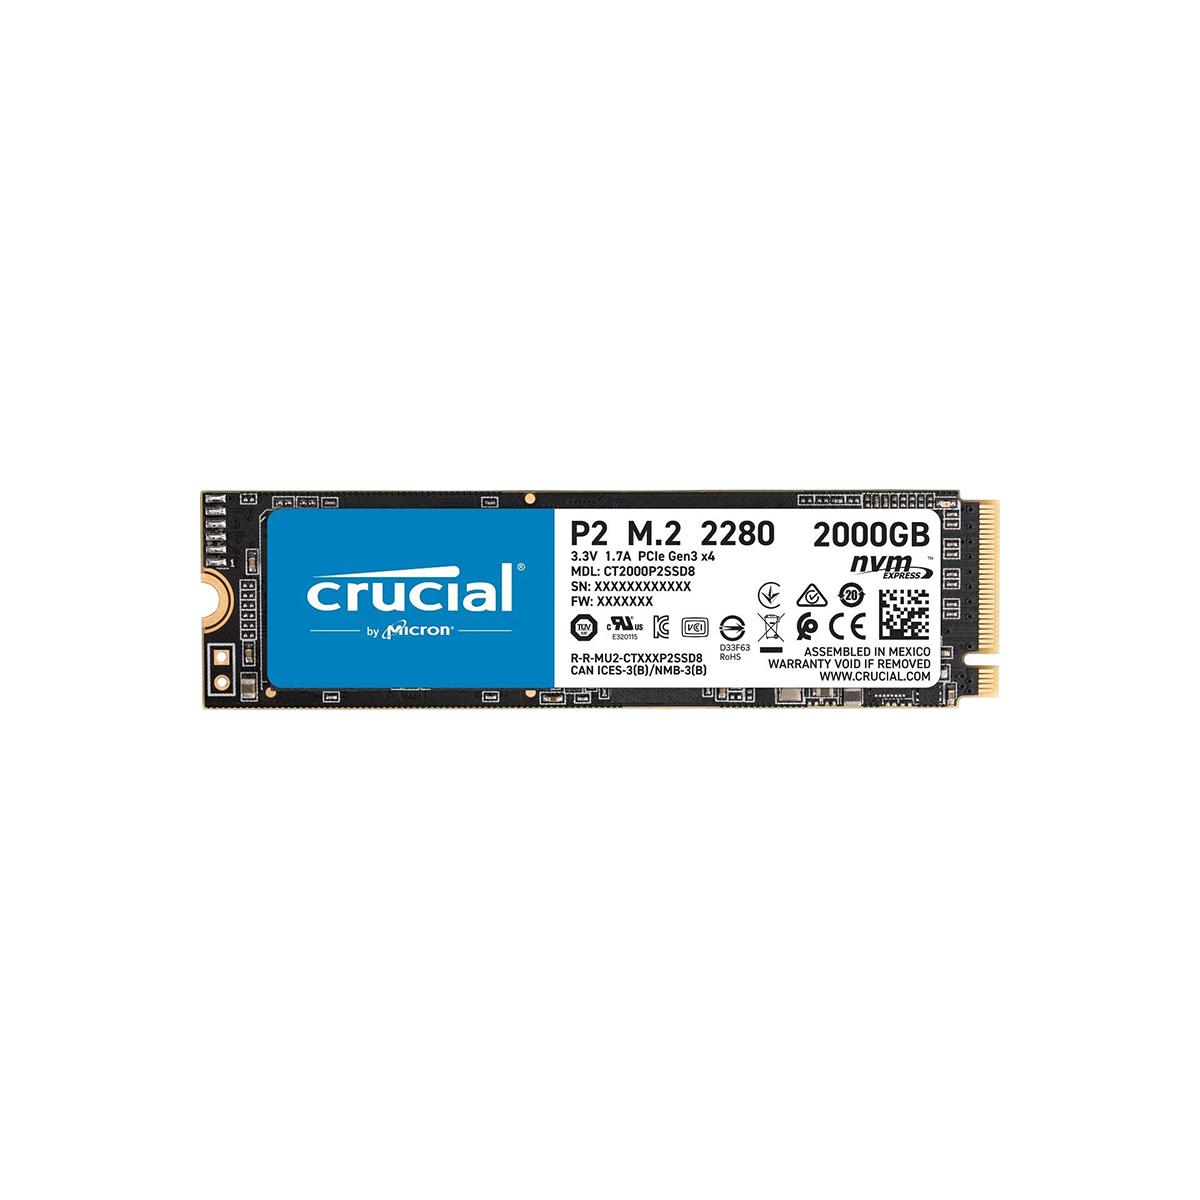 UNIDAD SSD M.2 CRUCIAL 2TB (CT2000P2SSD8) P2, PCIE 3.0, NVME, 3D NAND, 2280 - CRUCIAL